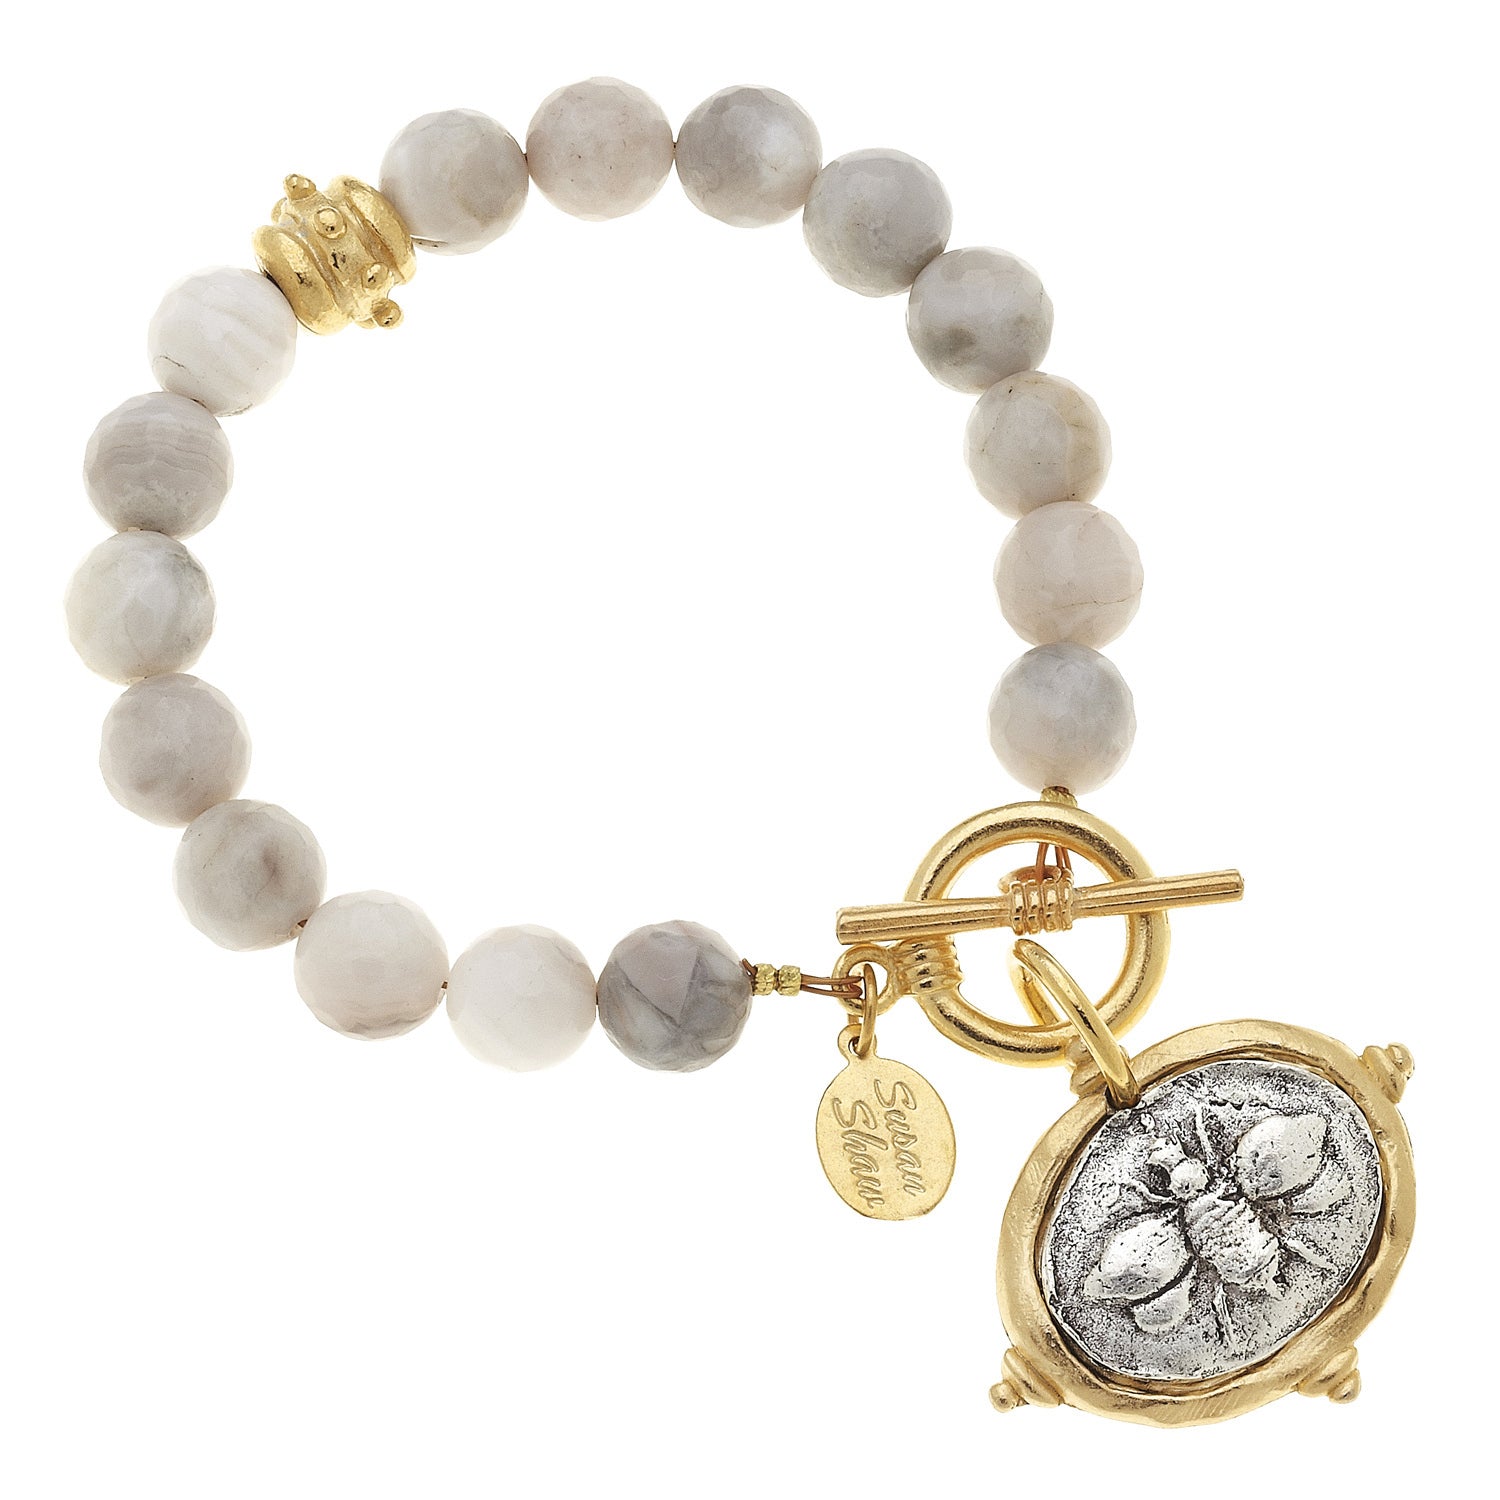 Susan Shaw Jewelry Silverlace Agate Bee Bracelet, 2 Tone Bee Charm in Gold